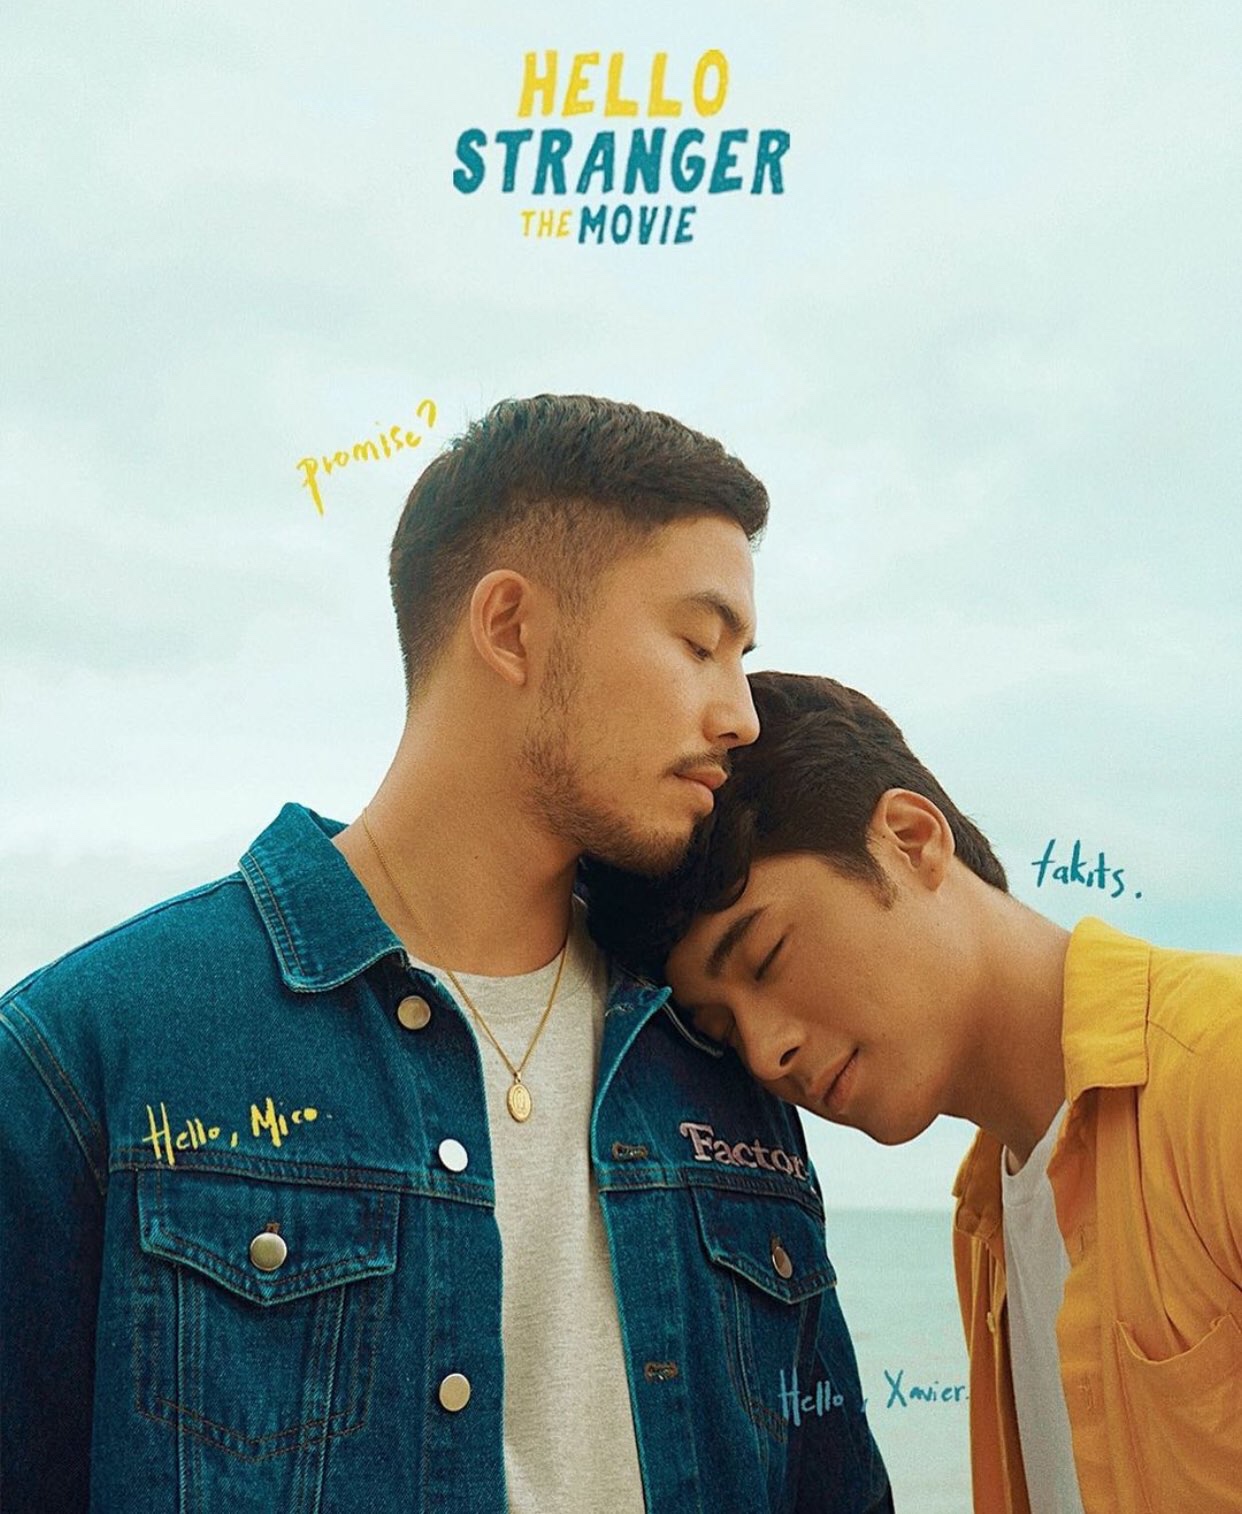 Watch Hello Stranger The Movie Right Now - Here's Why! (REVIEW)